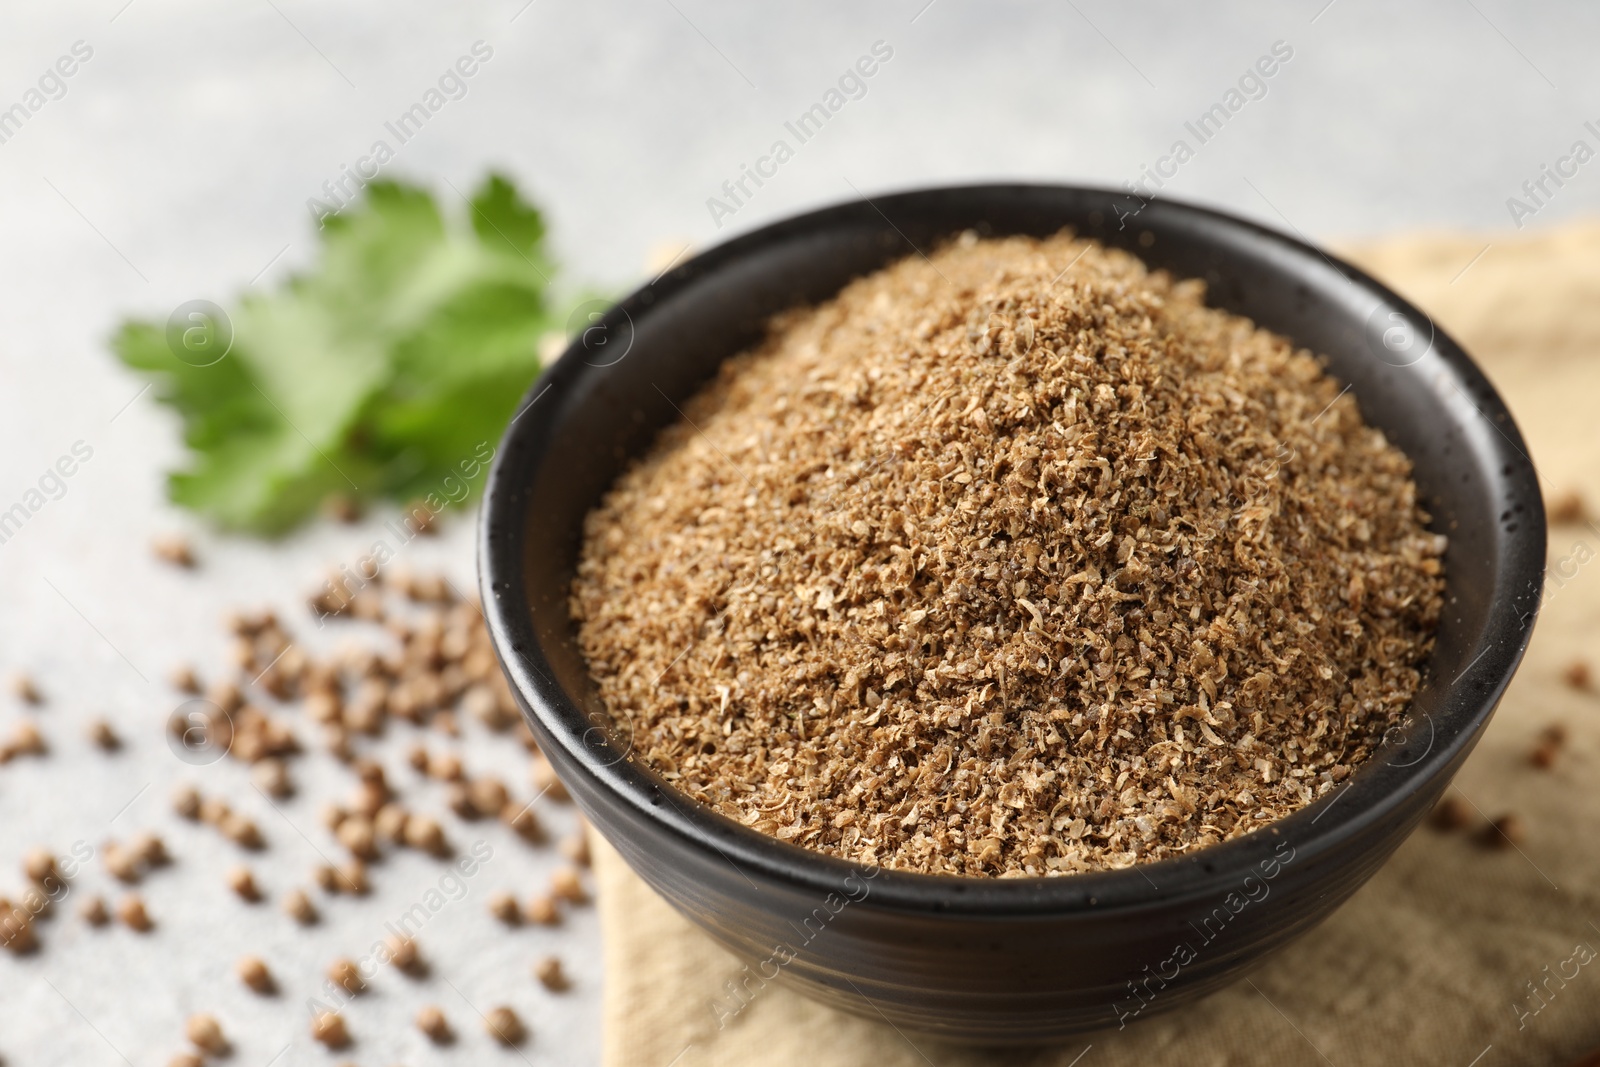 Photo of Coriander powder in bowl and seeds on table, closeup